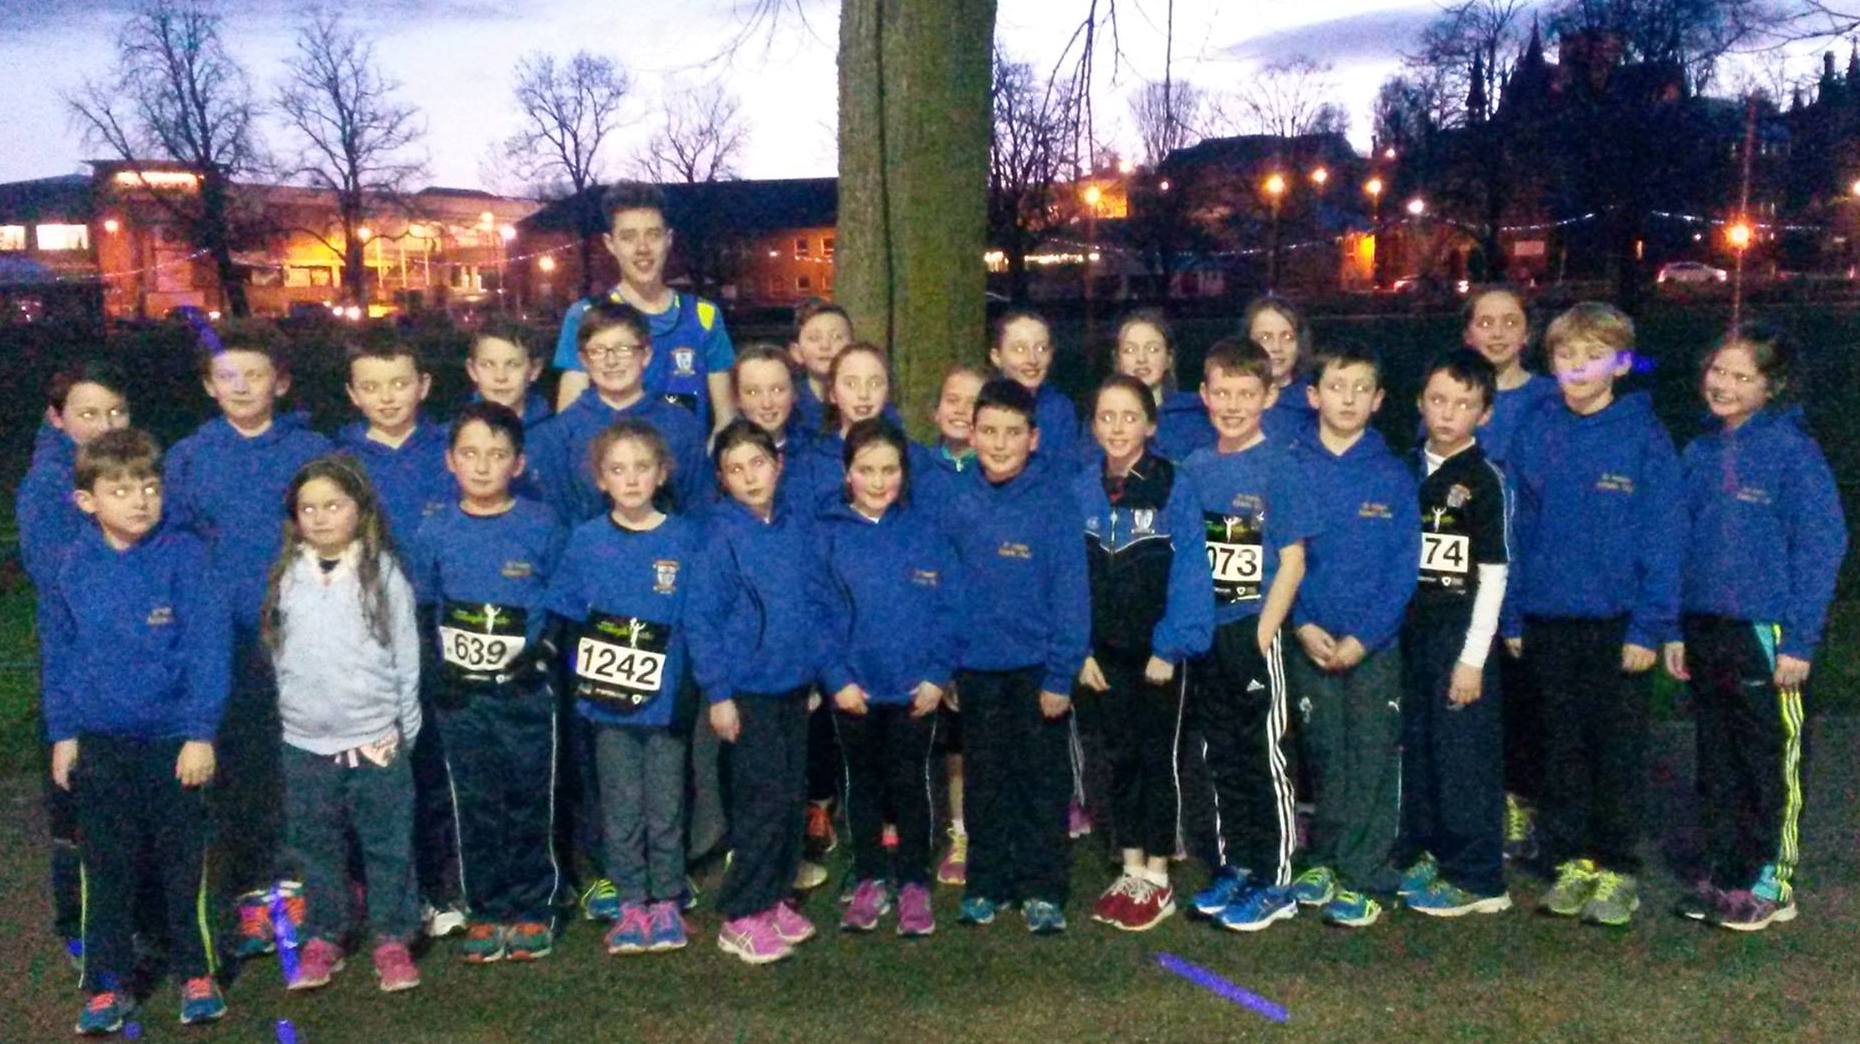 St Peter's AC athletes at Armagh International Road Races (Armagh, February 2016)